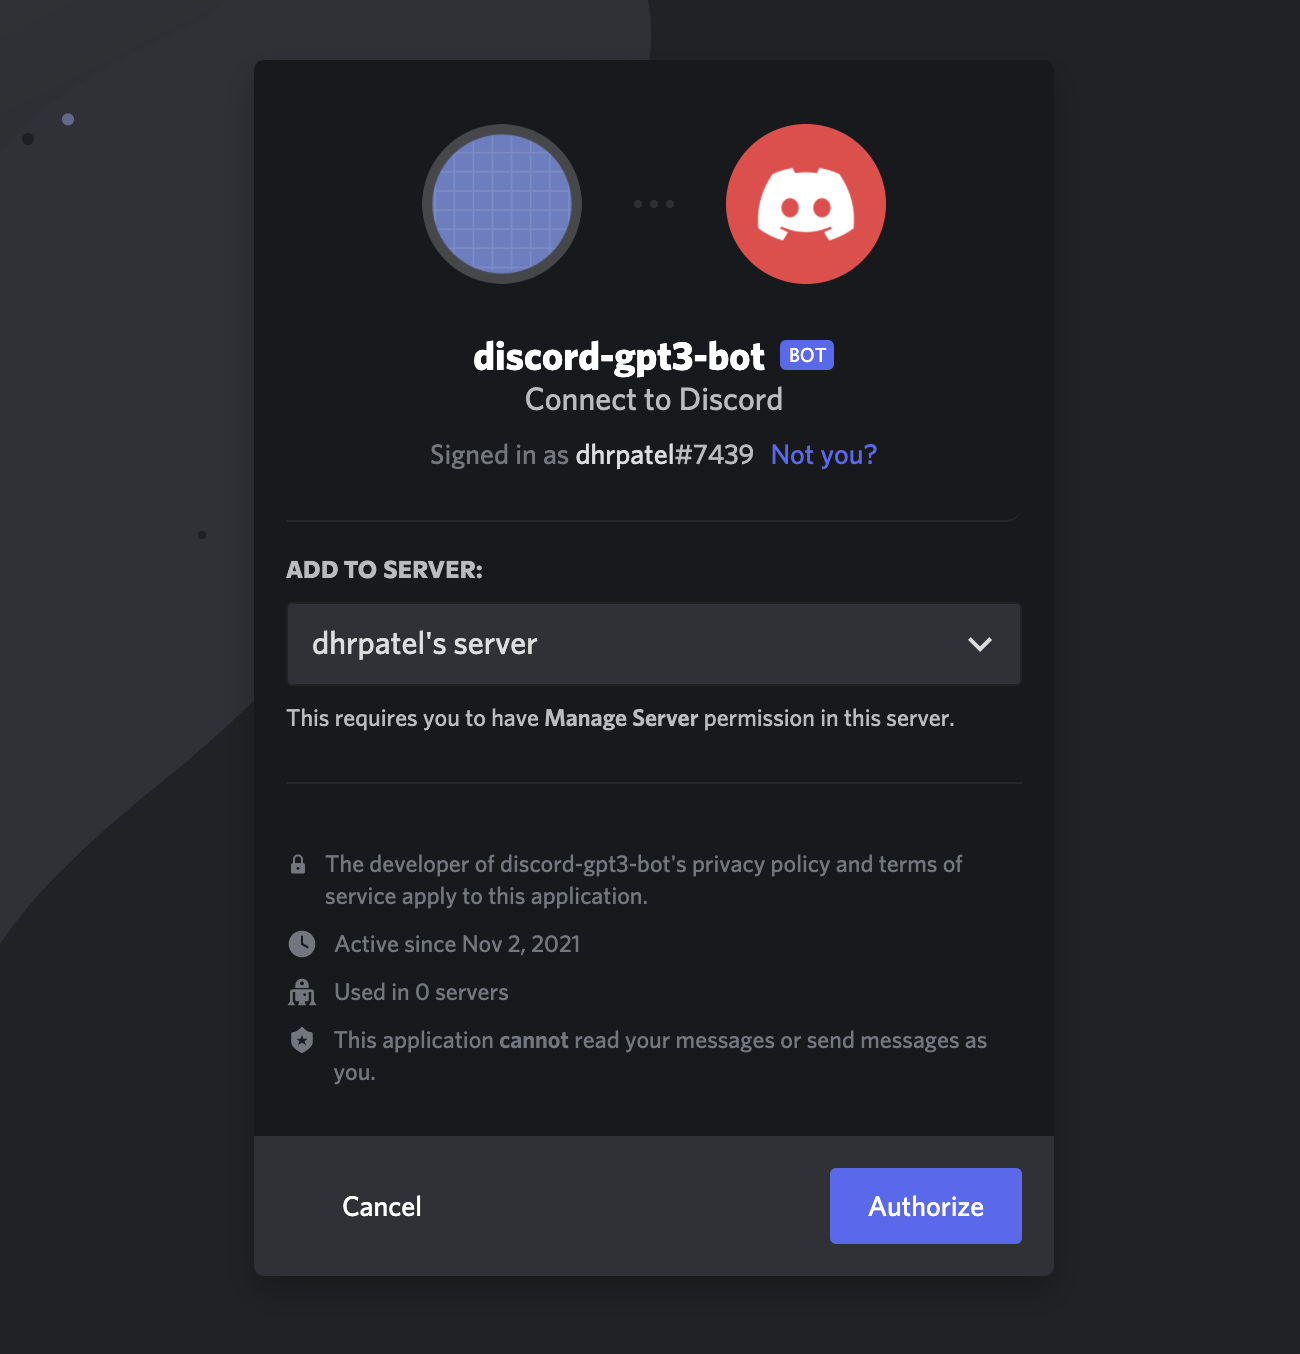 Dialog asking user to authorize bot to a Discord server